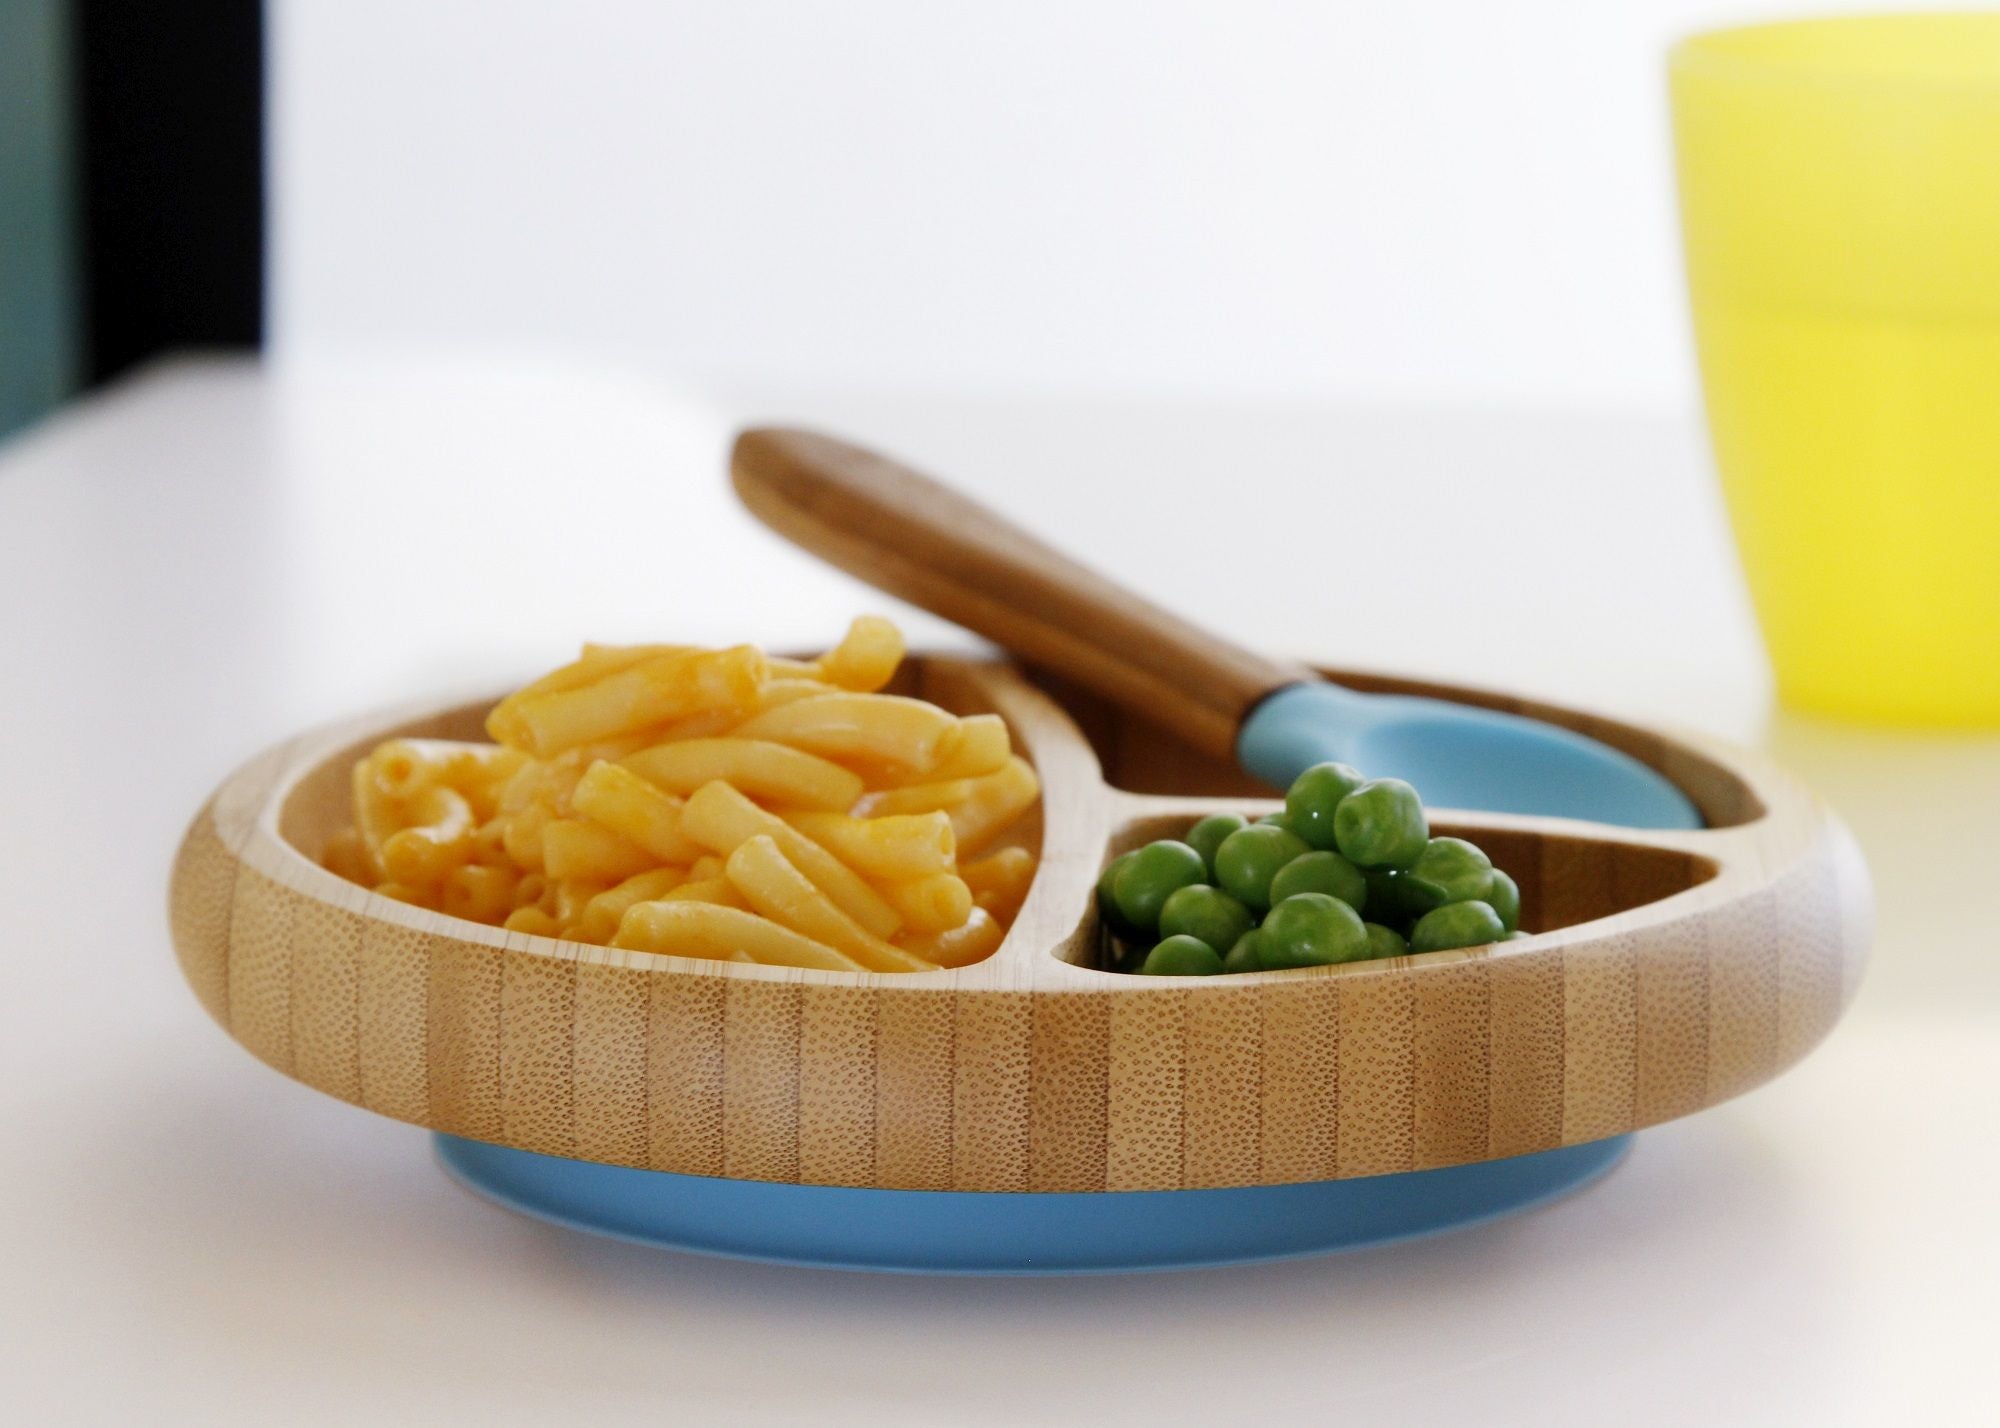 Avanchy | Bamboo Suction Divided Baby Plate